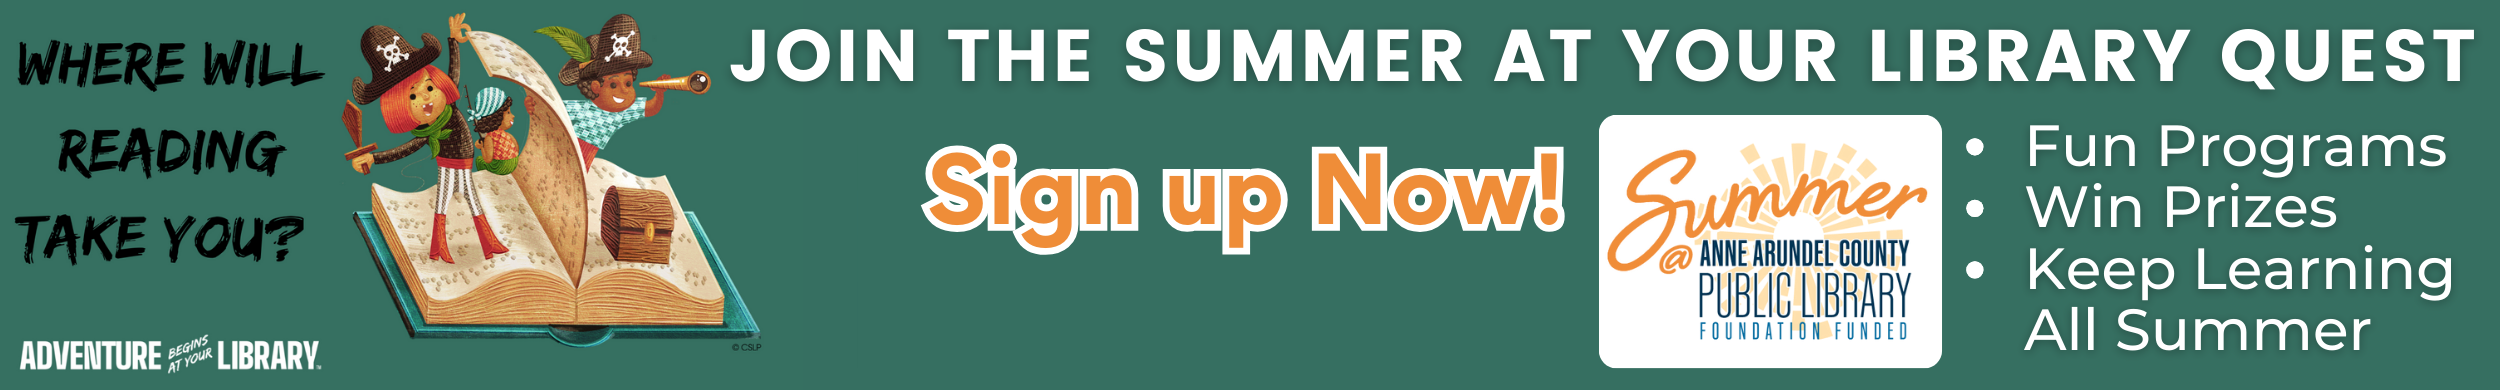 Summer @ Your Library Events and Sign Up